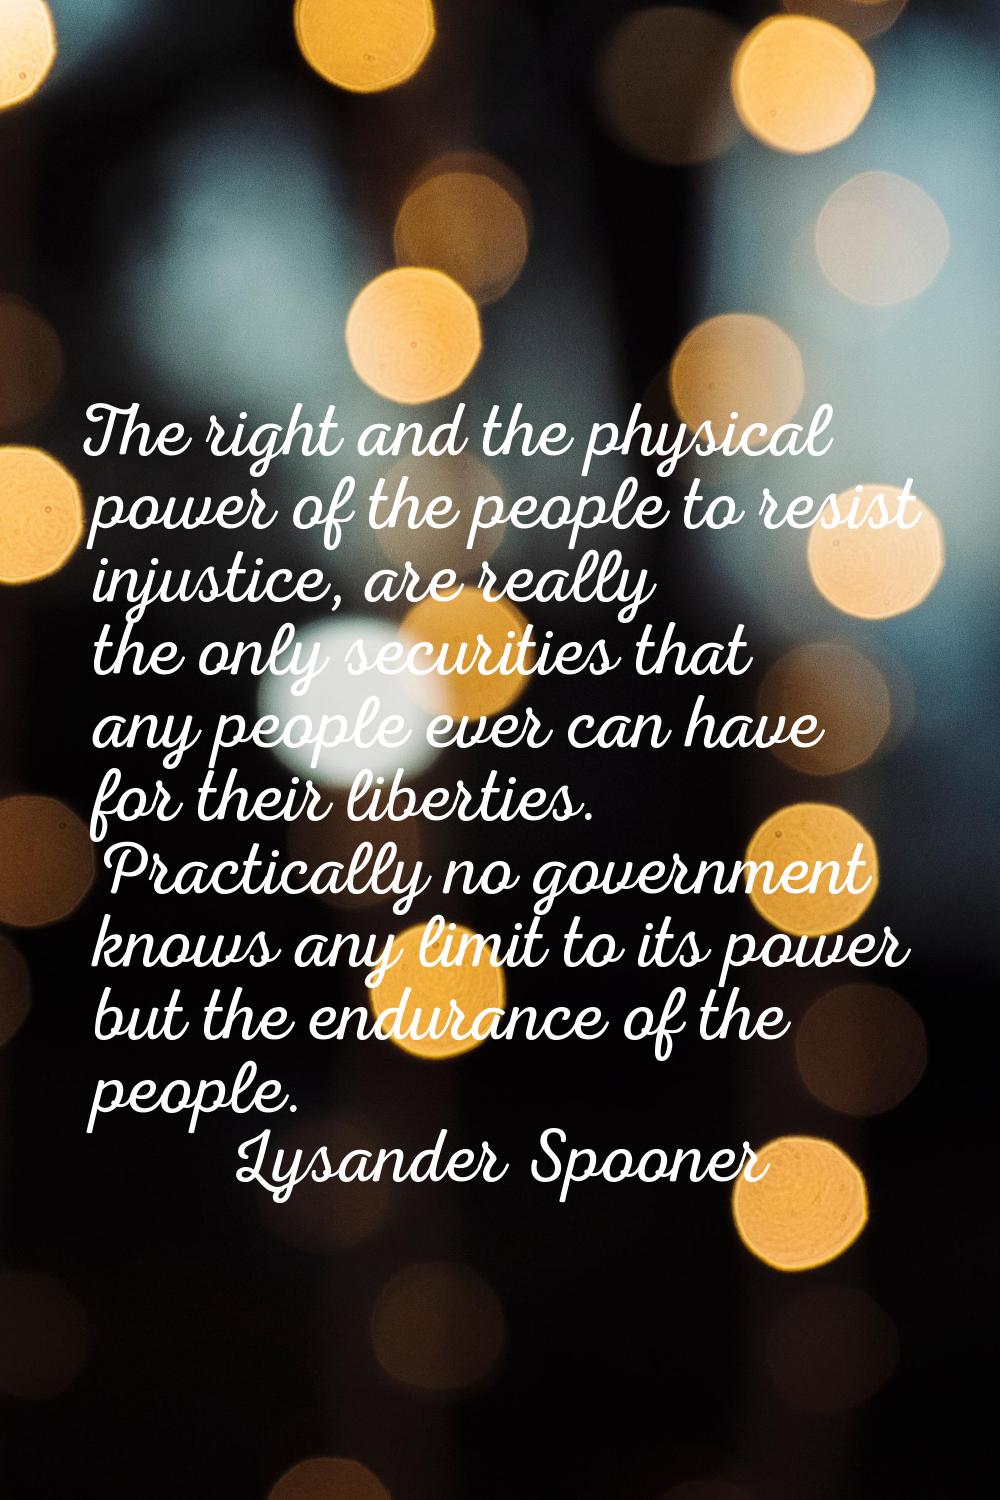 The right and the physical power of the people to resist injustice, are really the only securities 